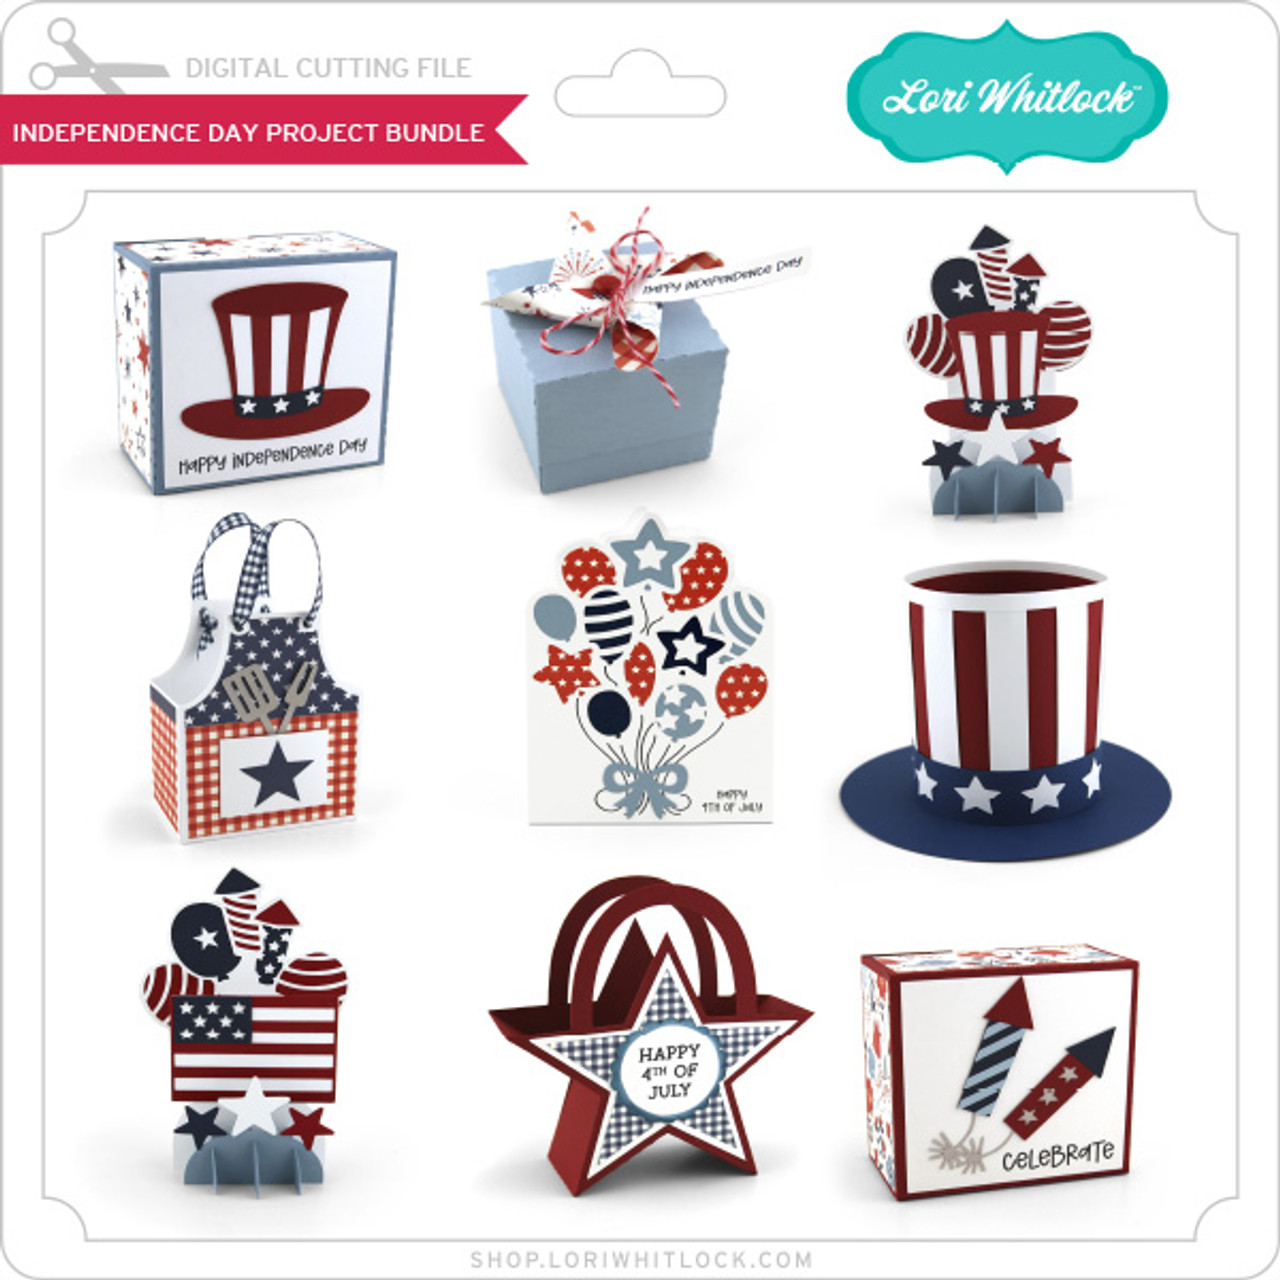 Independence Day Project Bundle - Lori Whitlock's SVG Shop